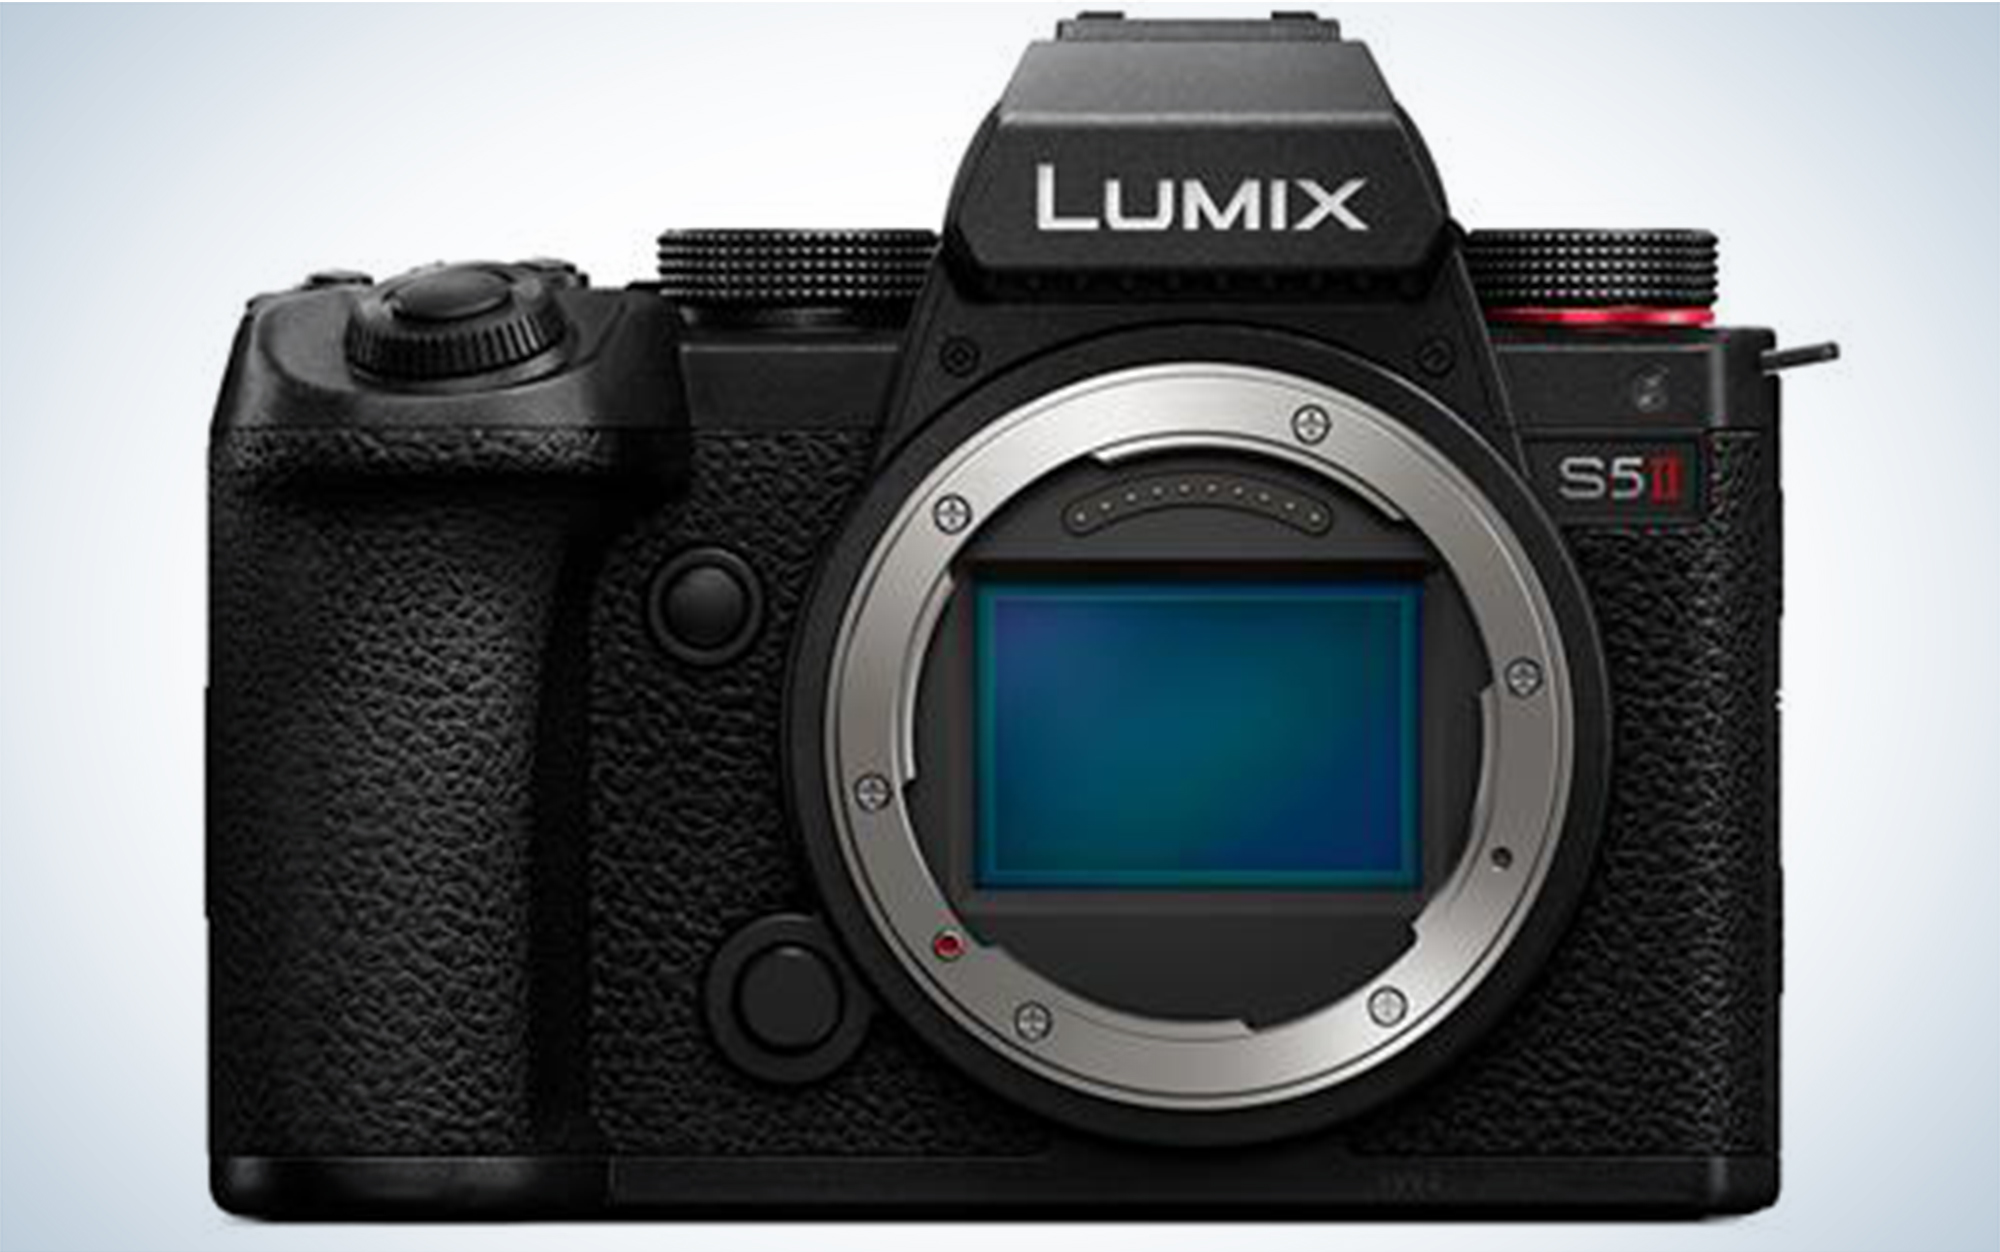 The Panasonic Lumix S5 II is one of the best cameras for wildlife photography.